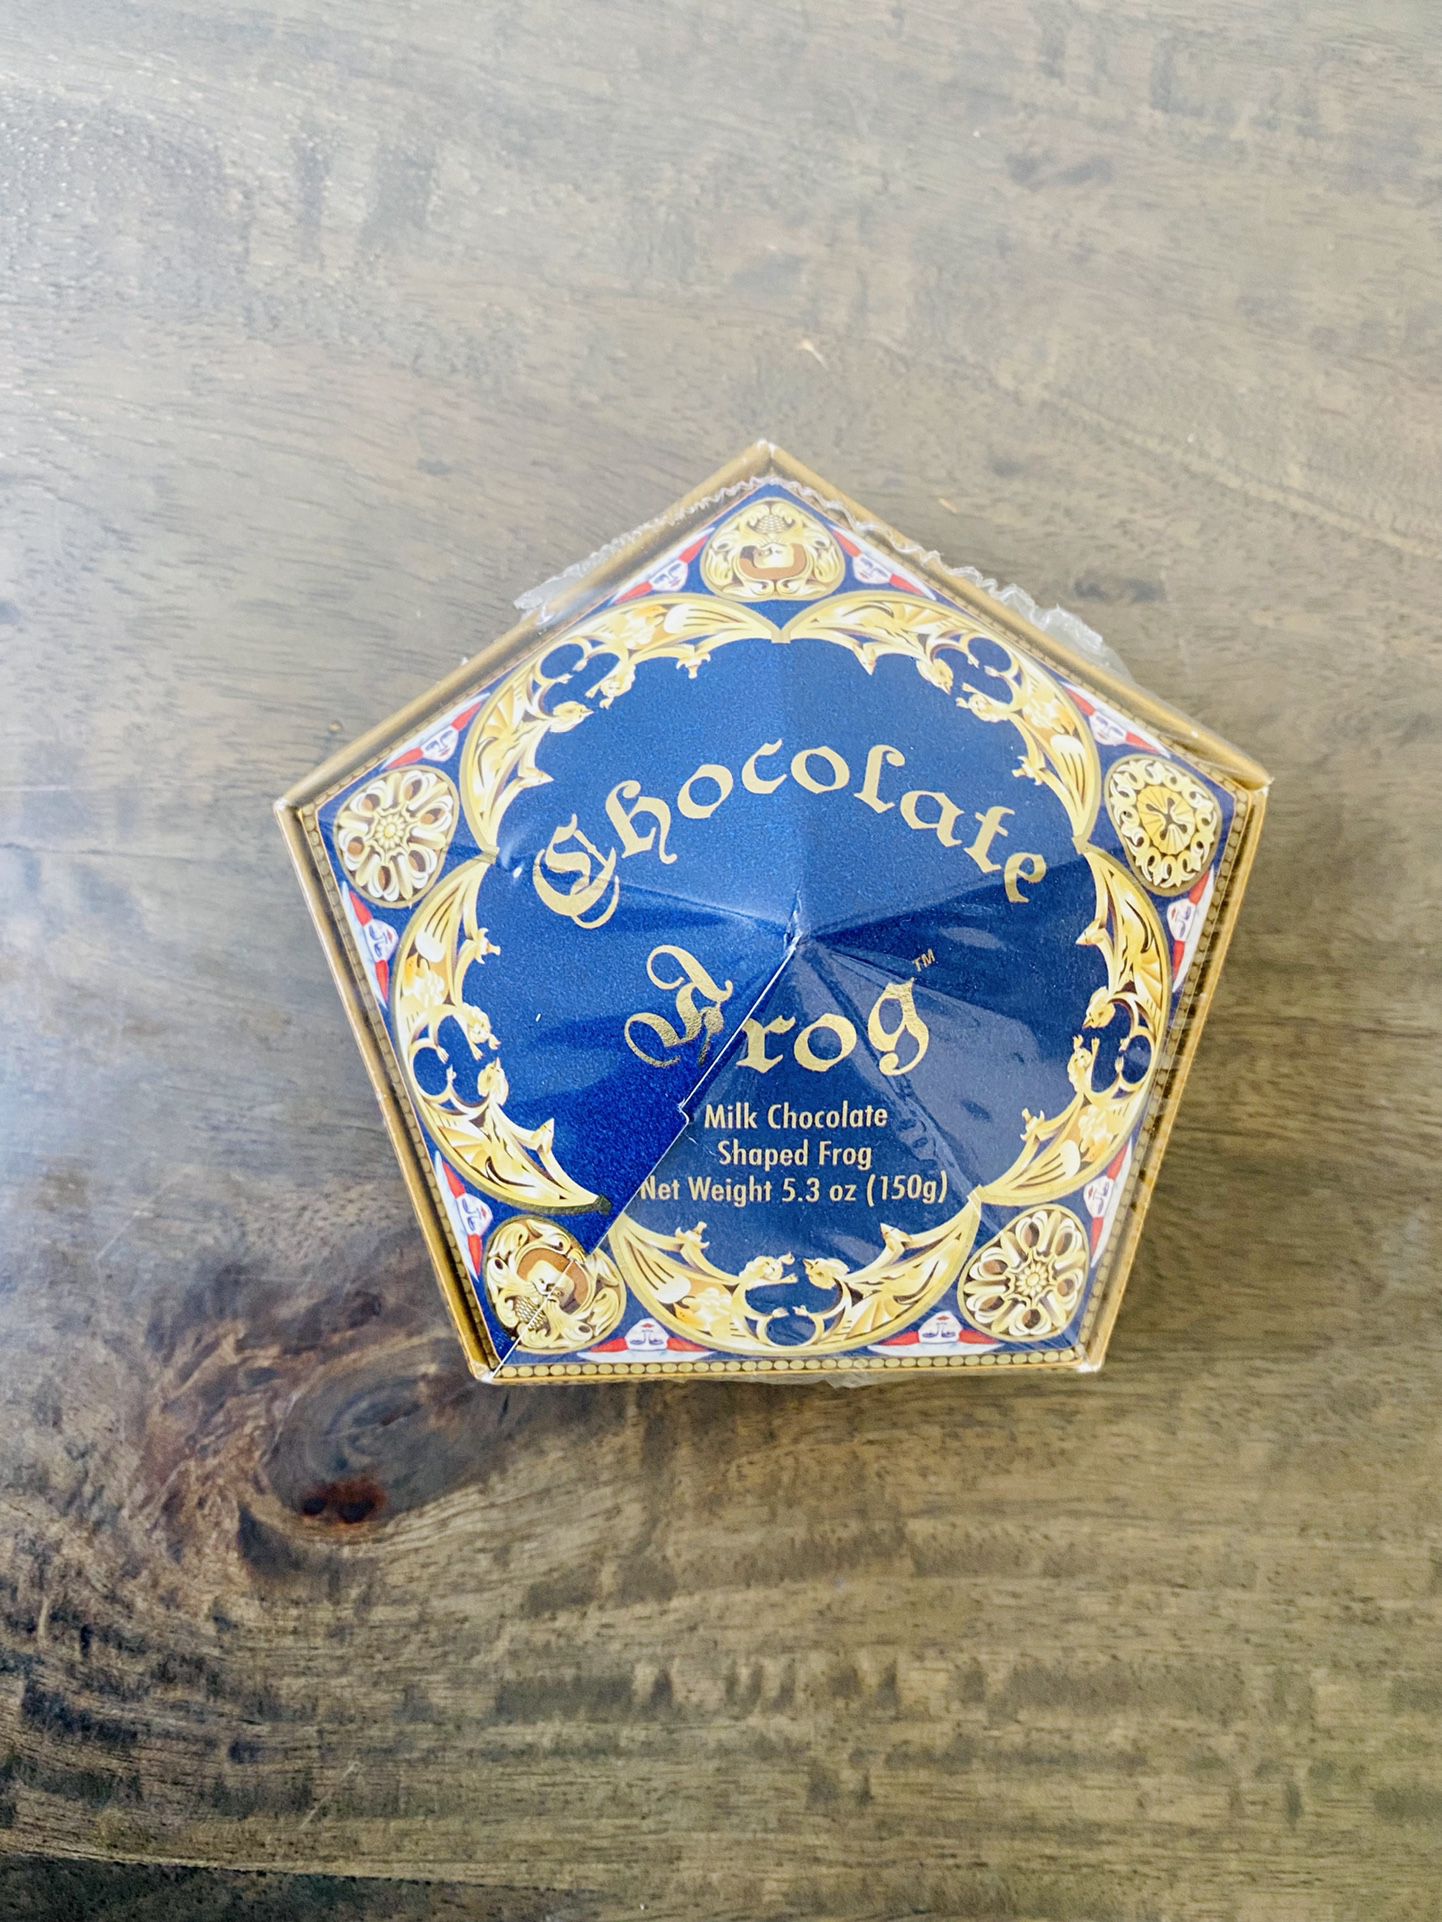 Wizarding World of Harry Potter Milk Chocolate Frog Includes Hogwarts Wizard Card